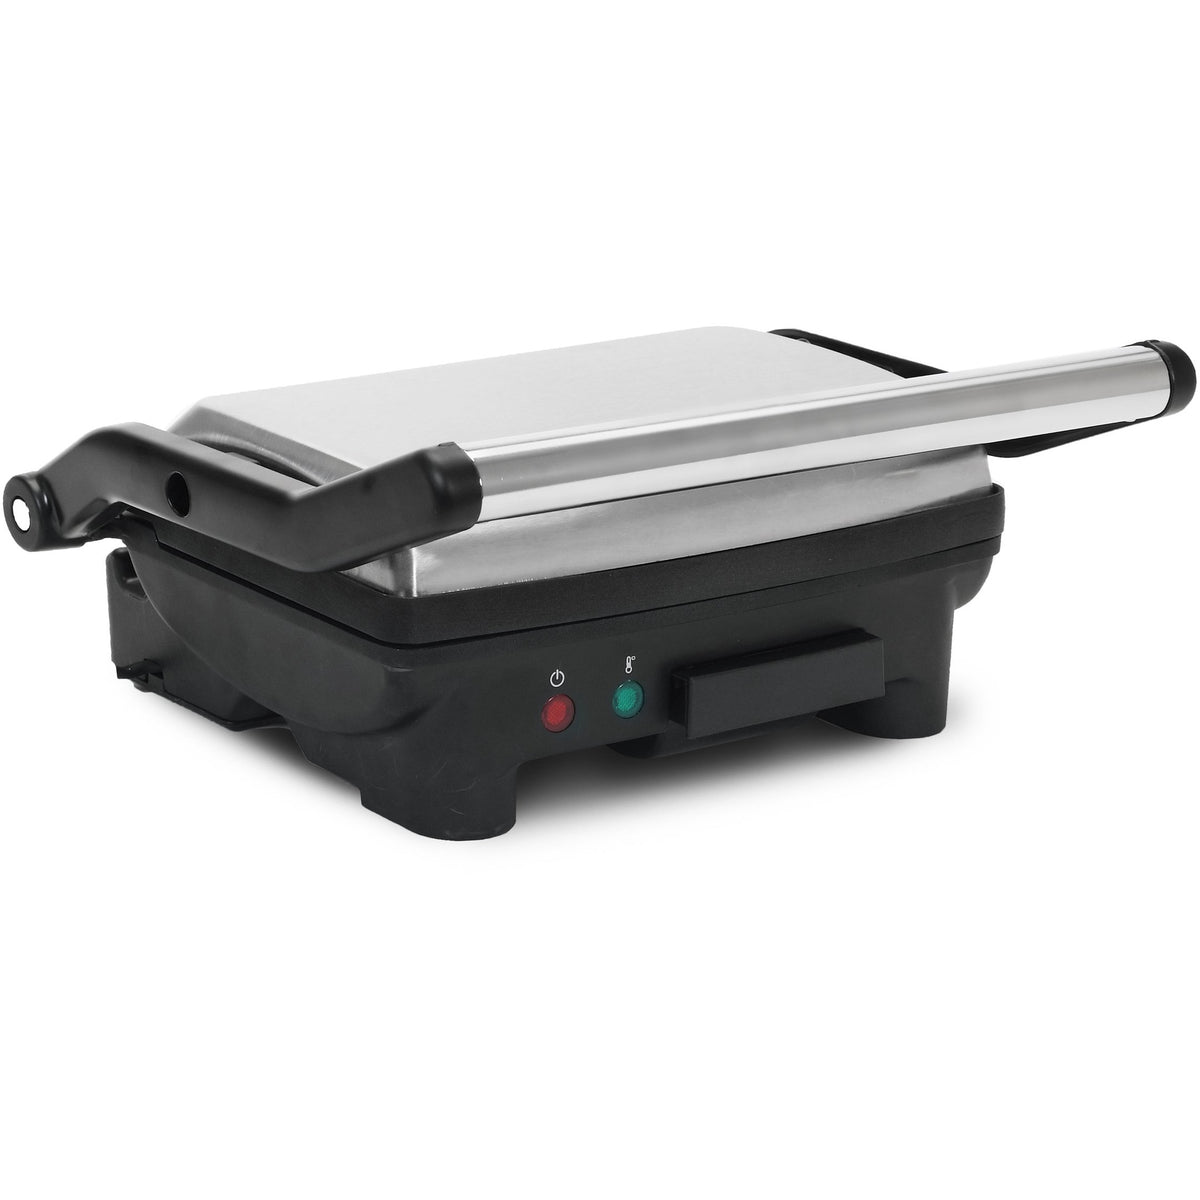 Nonstick Electric Panini Grill. Contact Grill. 180° Indoor Grill